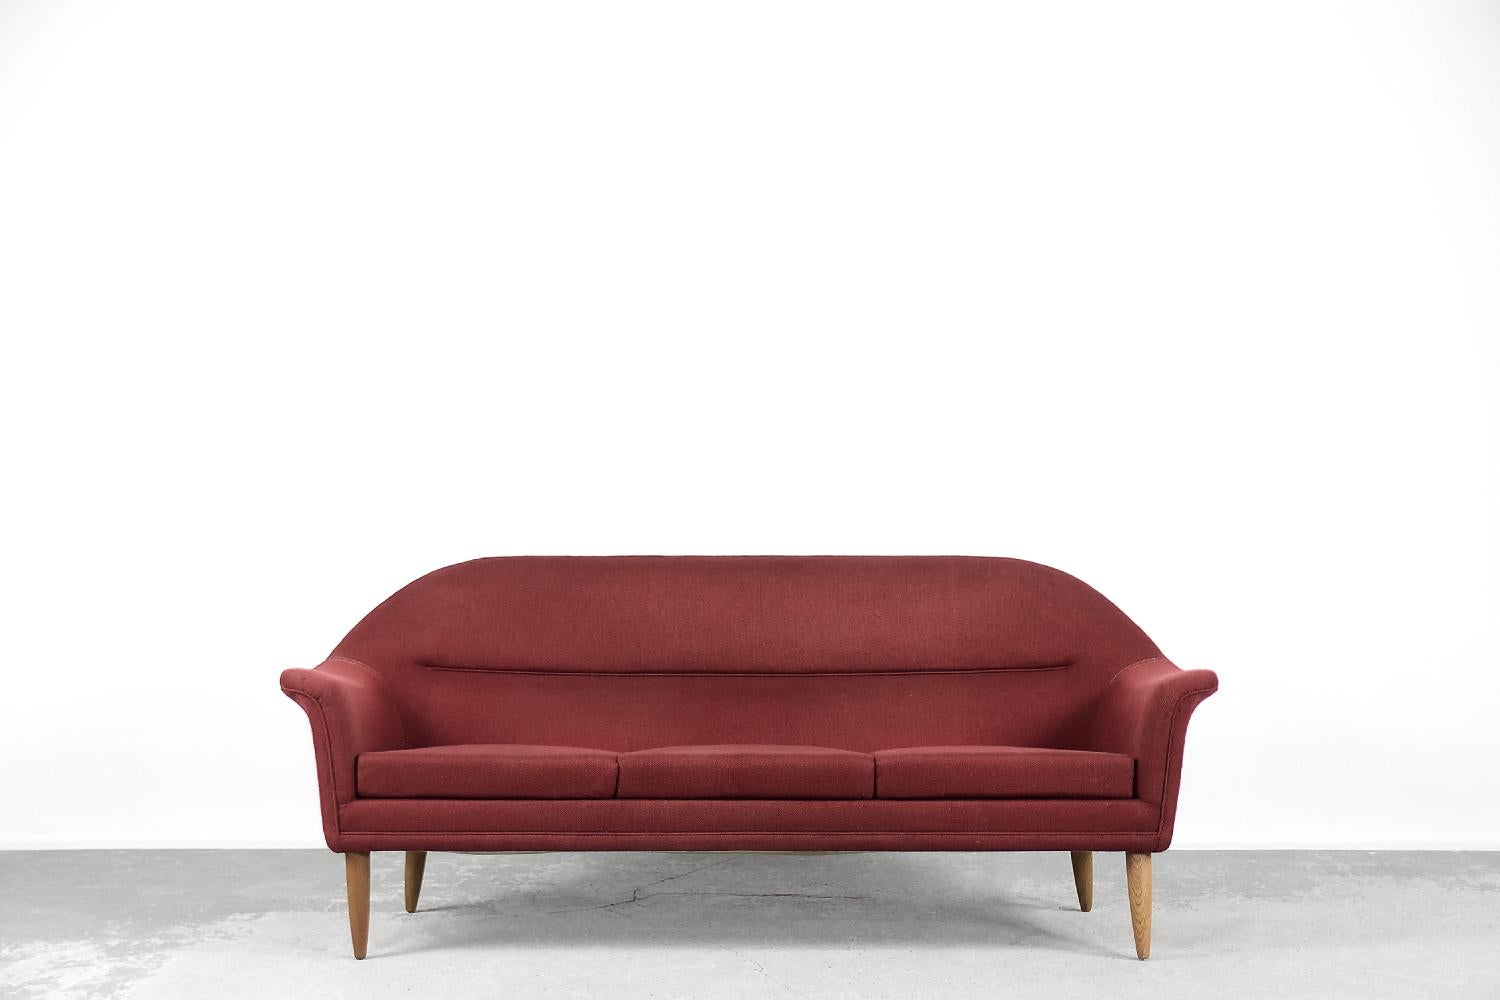 This three-seater sofa was made by the Swedish manufacturer Bröderna Anderssons during the 1950s. The sofa is upholstered with a high-quality material in a noble red color. It is an example of an old craft school, where the frame and armrests are